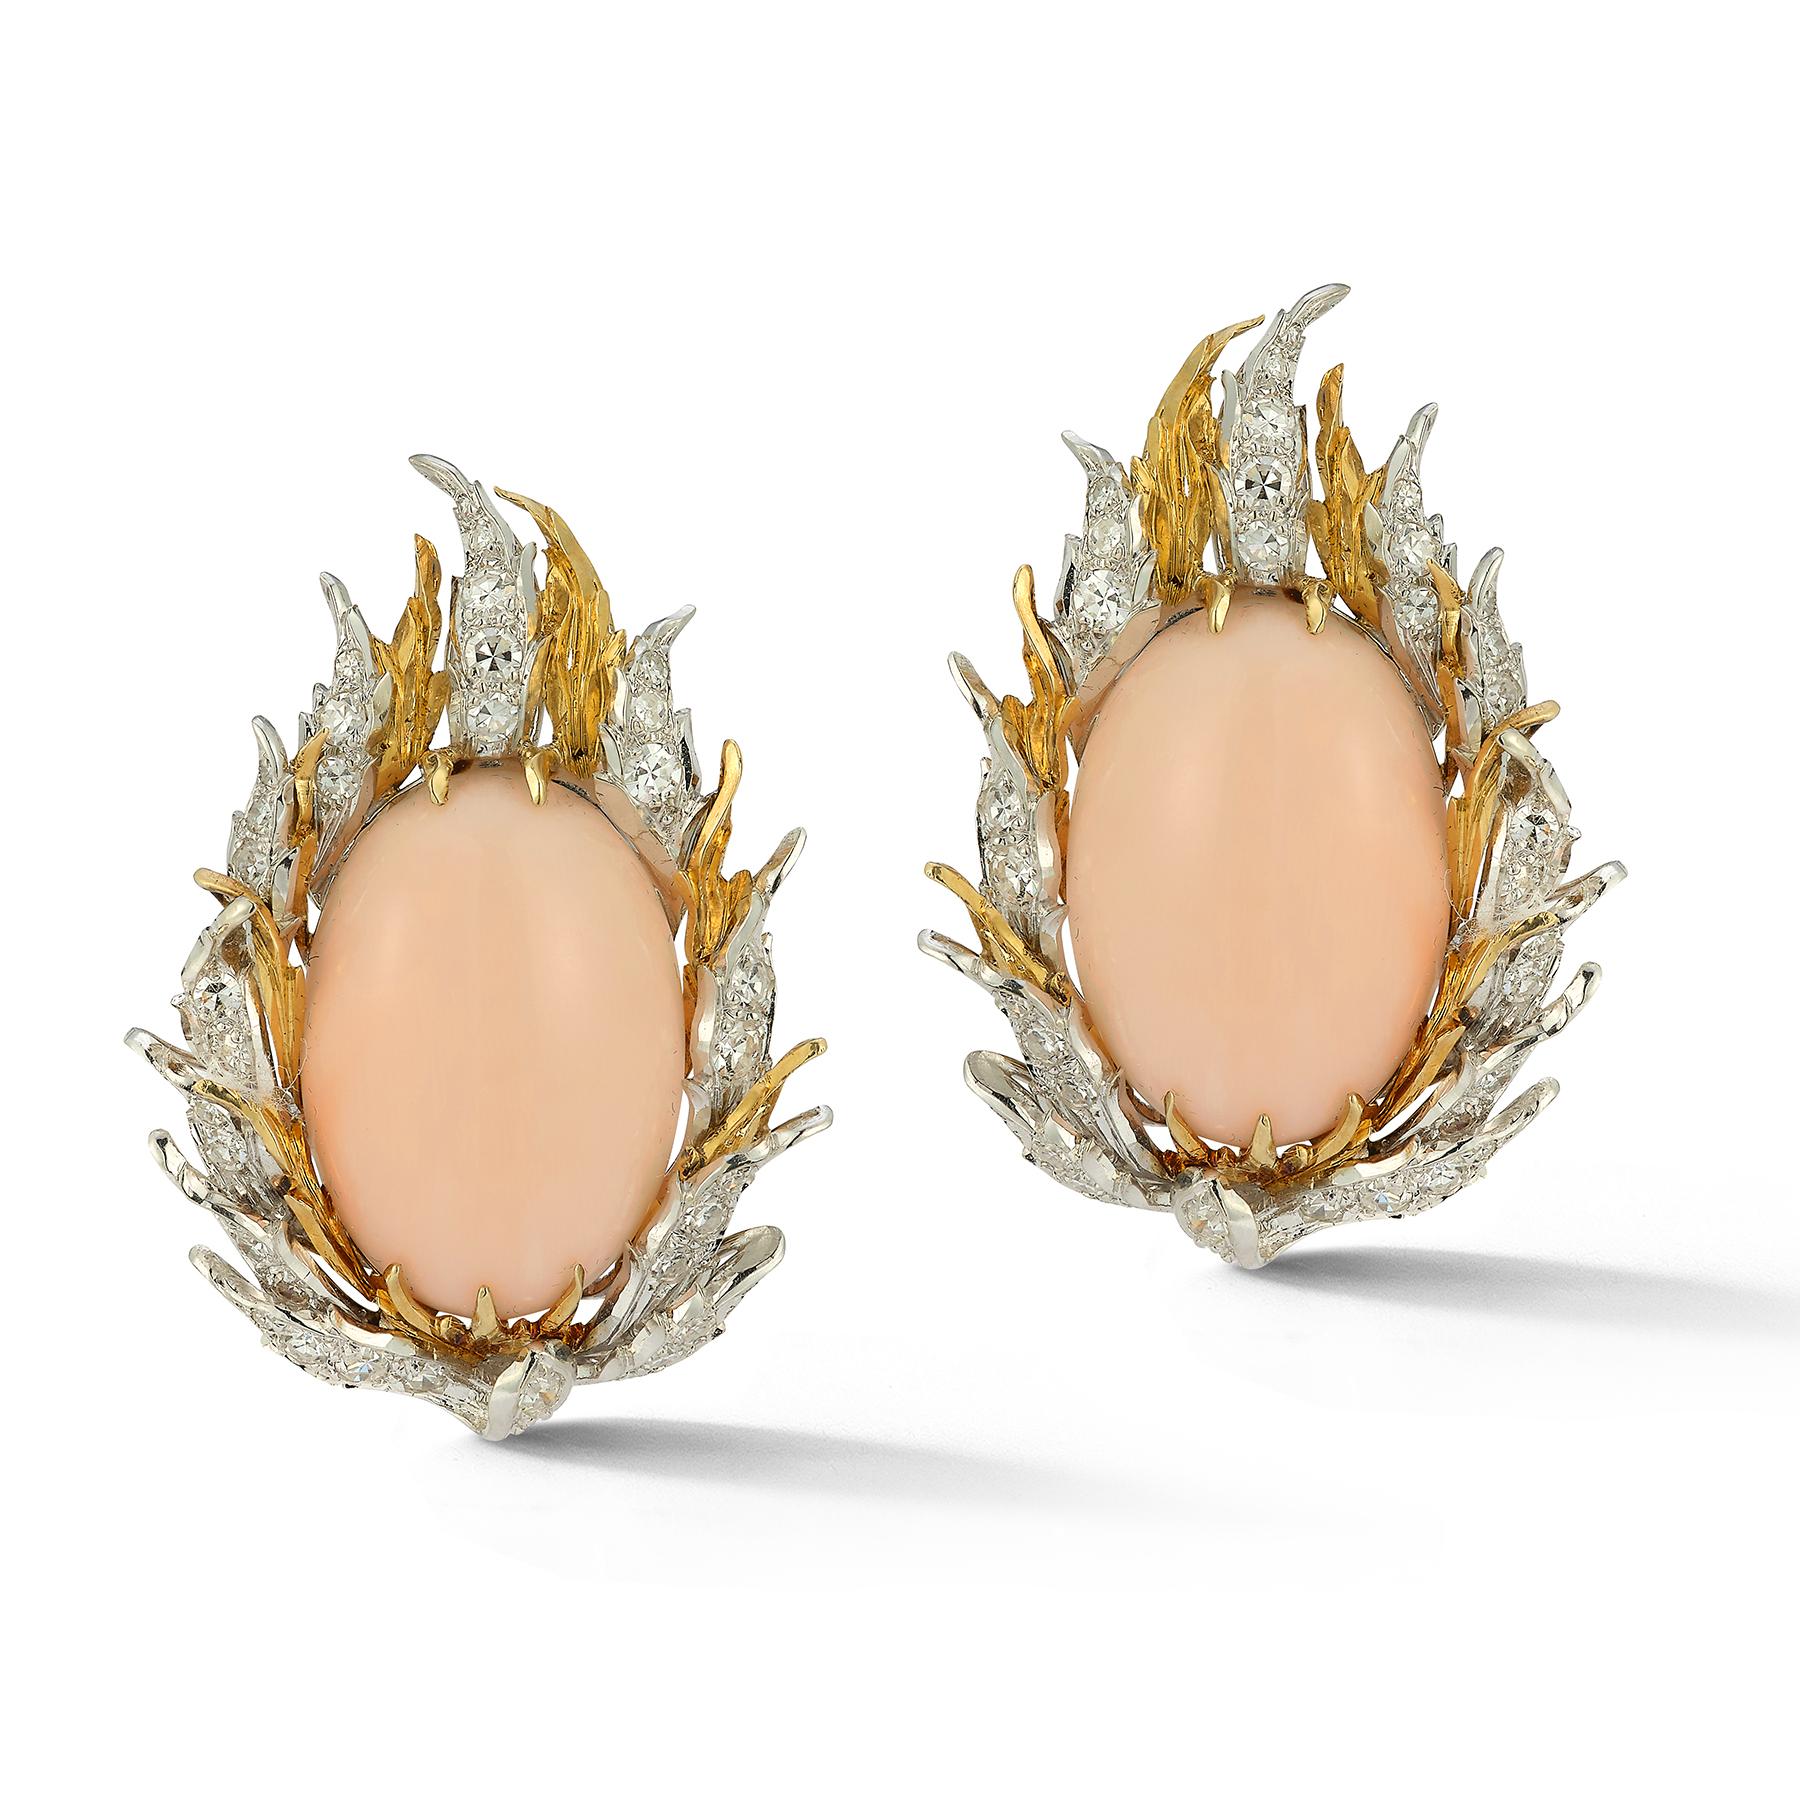 Buccellati Angel Skin Cabochon Coral & Diamond Earrings

2 cabochon corals surrounded by round cut diamonds set in 18k white & yellow gold.

Measurements: 1.5